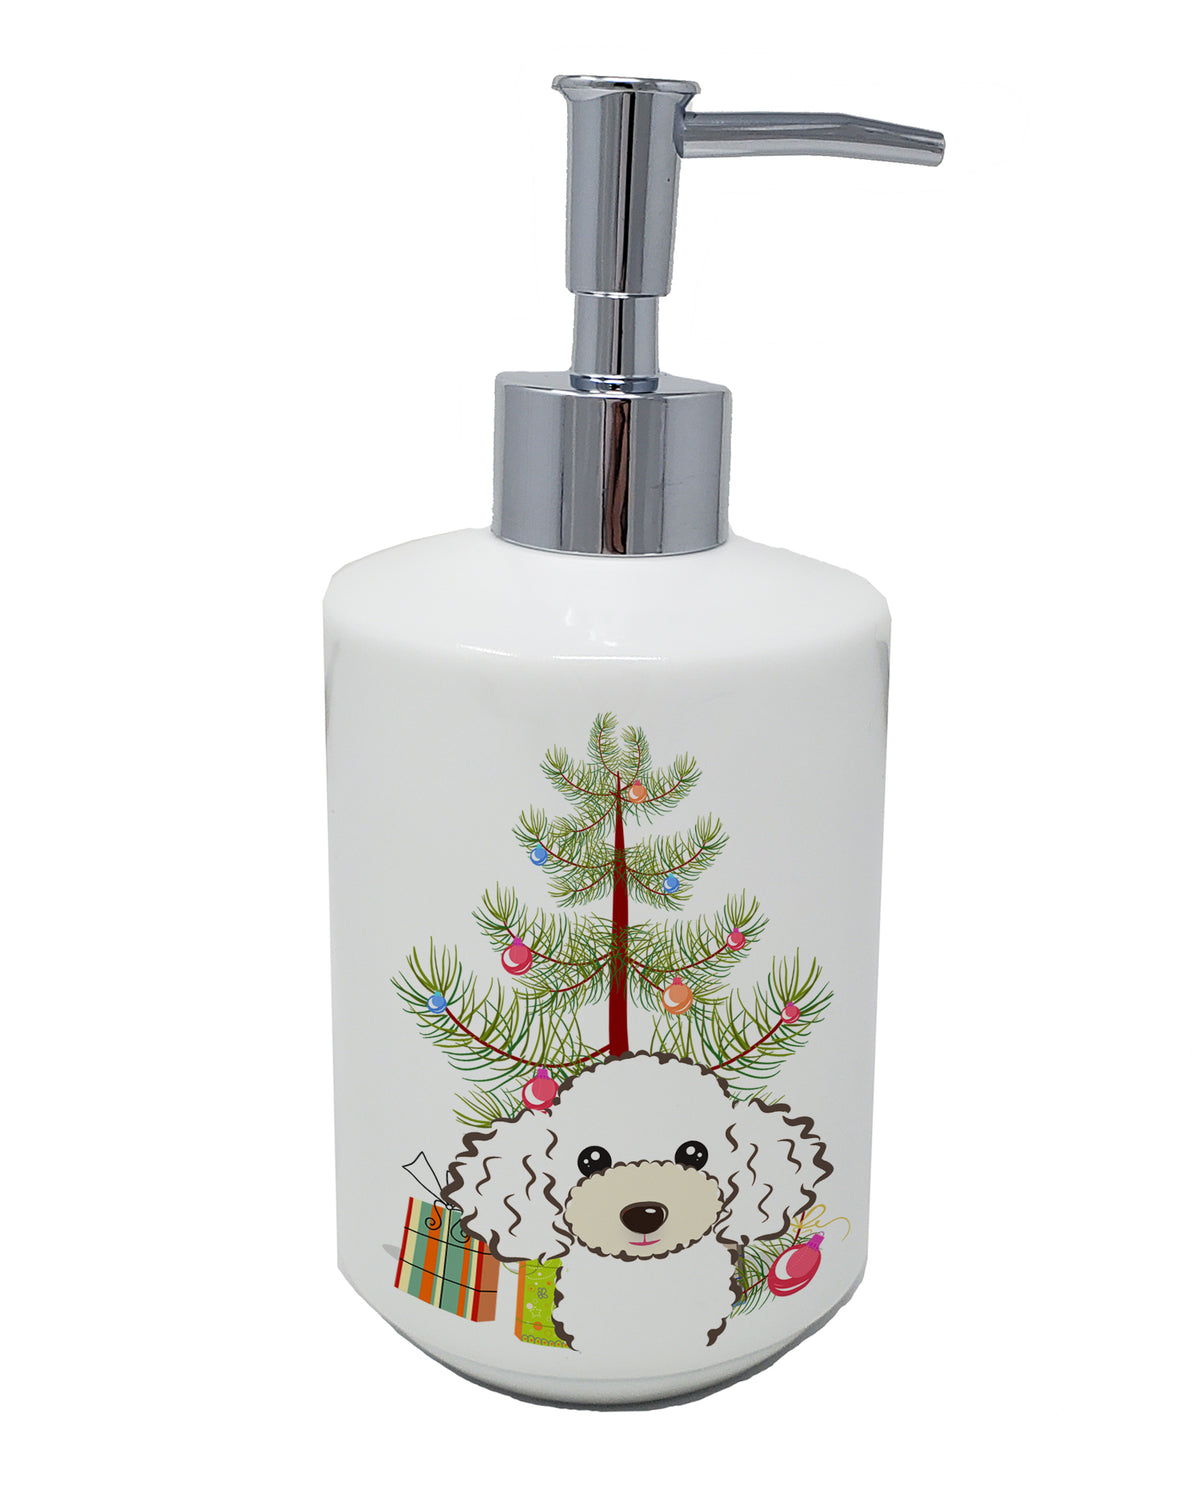 Buy this Christmas Tree and White Poodle Ceramic Soap Dispenser